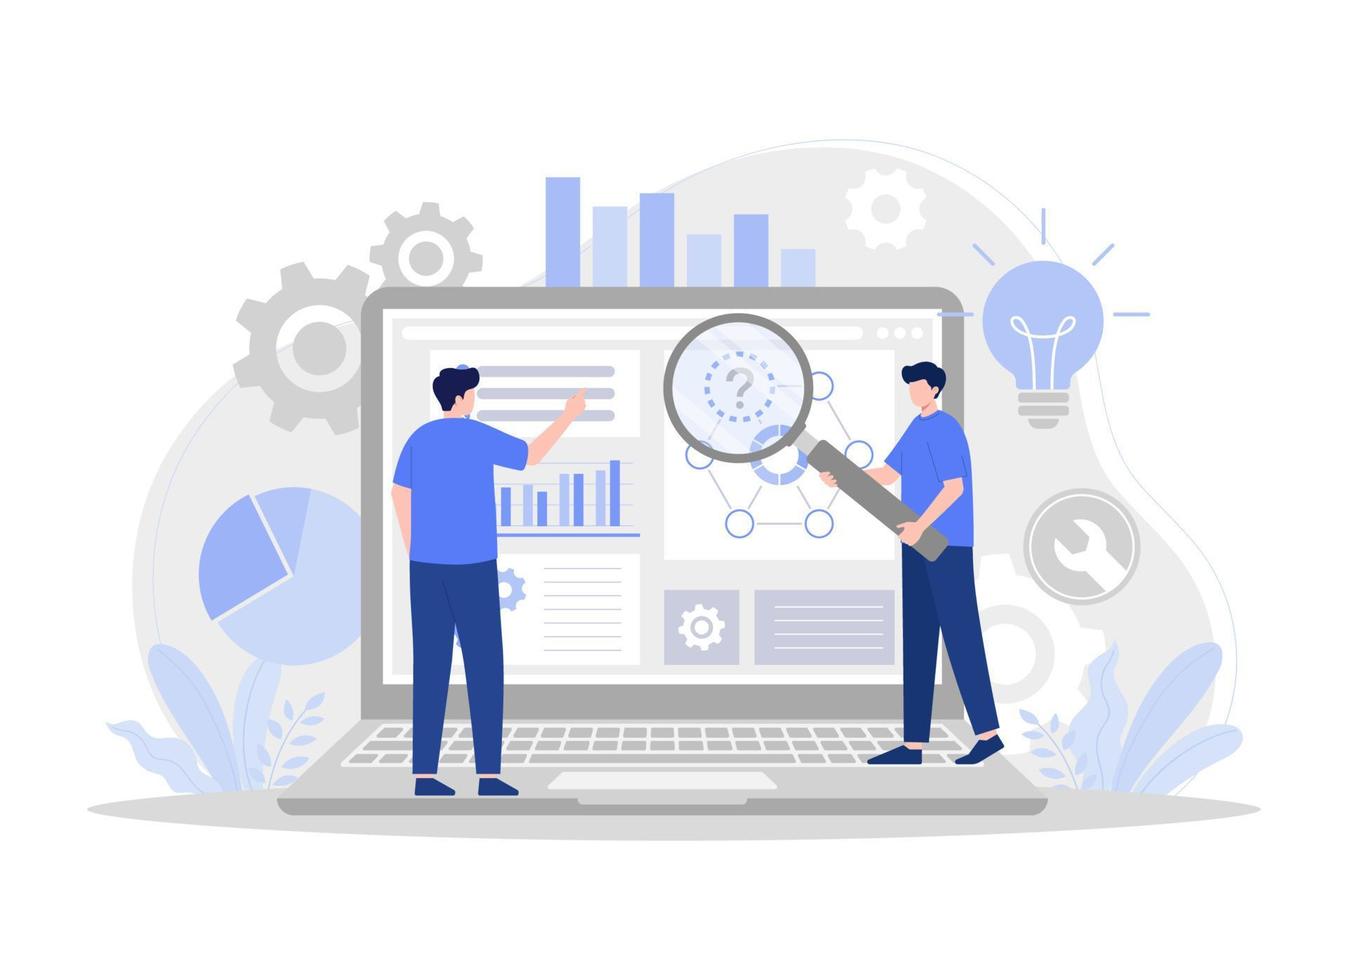 Creative teamwork. Building a business project on the Internet. Modern vector flat illustration